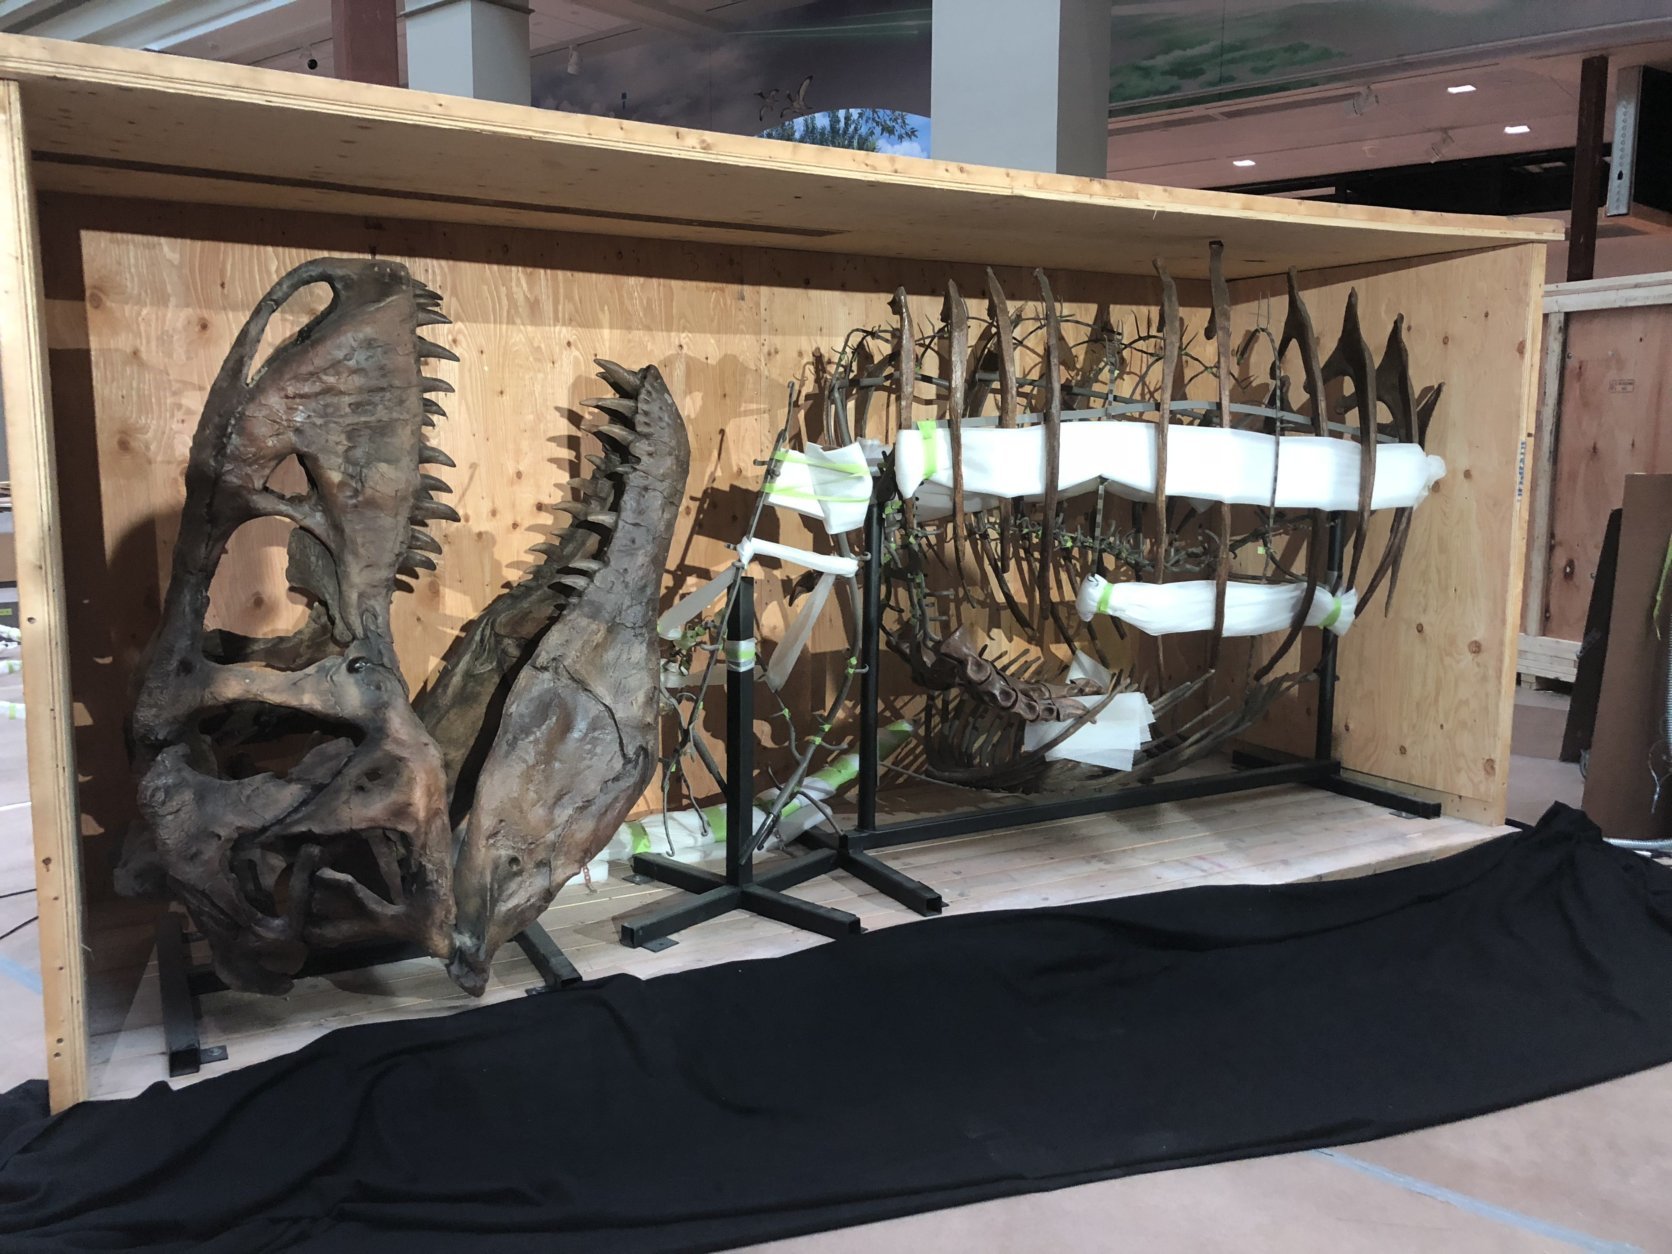 The newly restored dinosaur, named the Nation's T. rex, recently arrived back in the district after being restored in Canada. (WTOP/Melissa Howell)